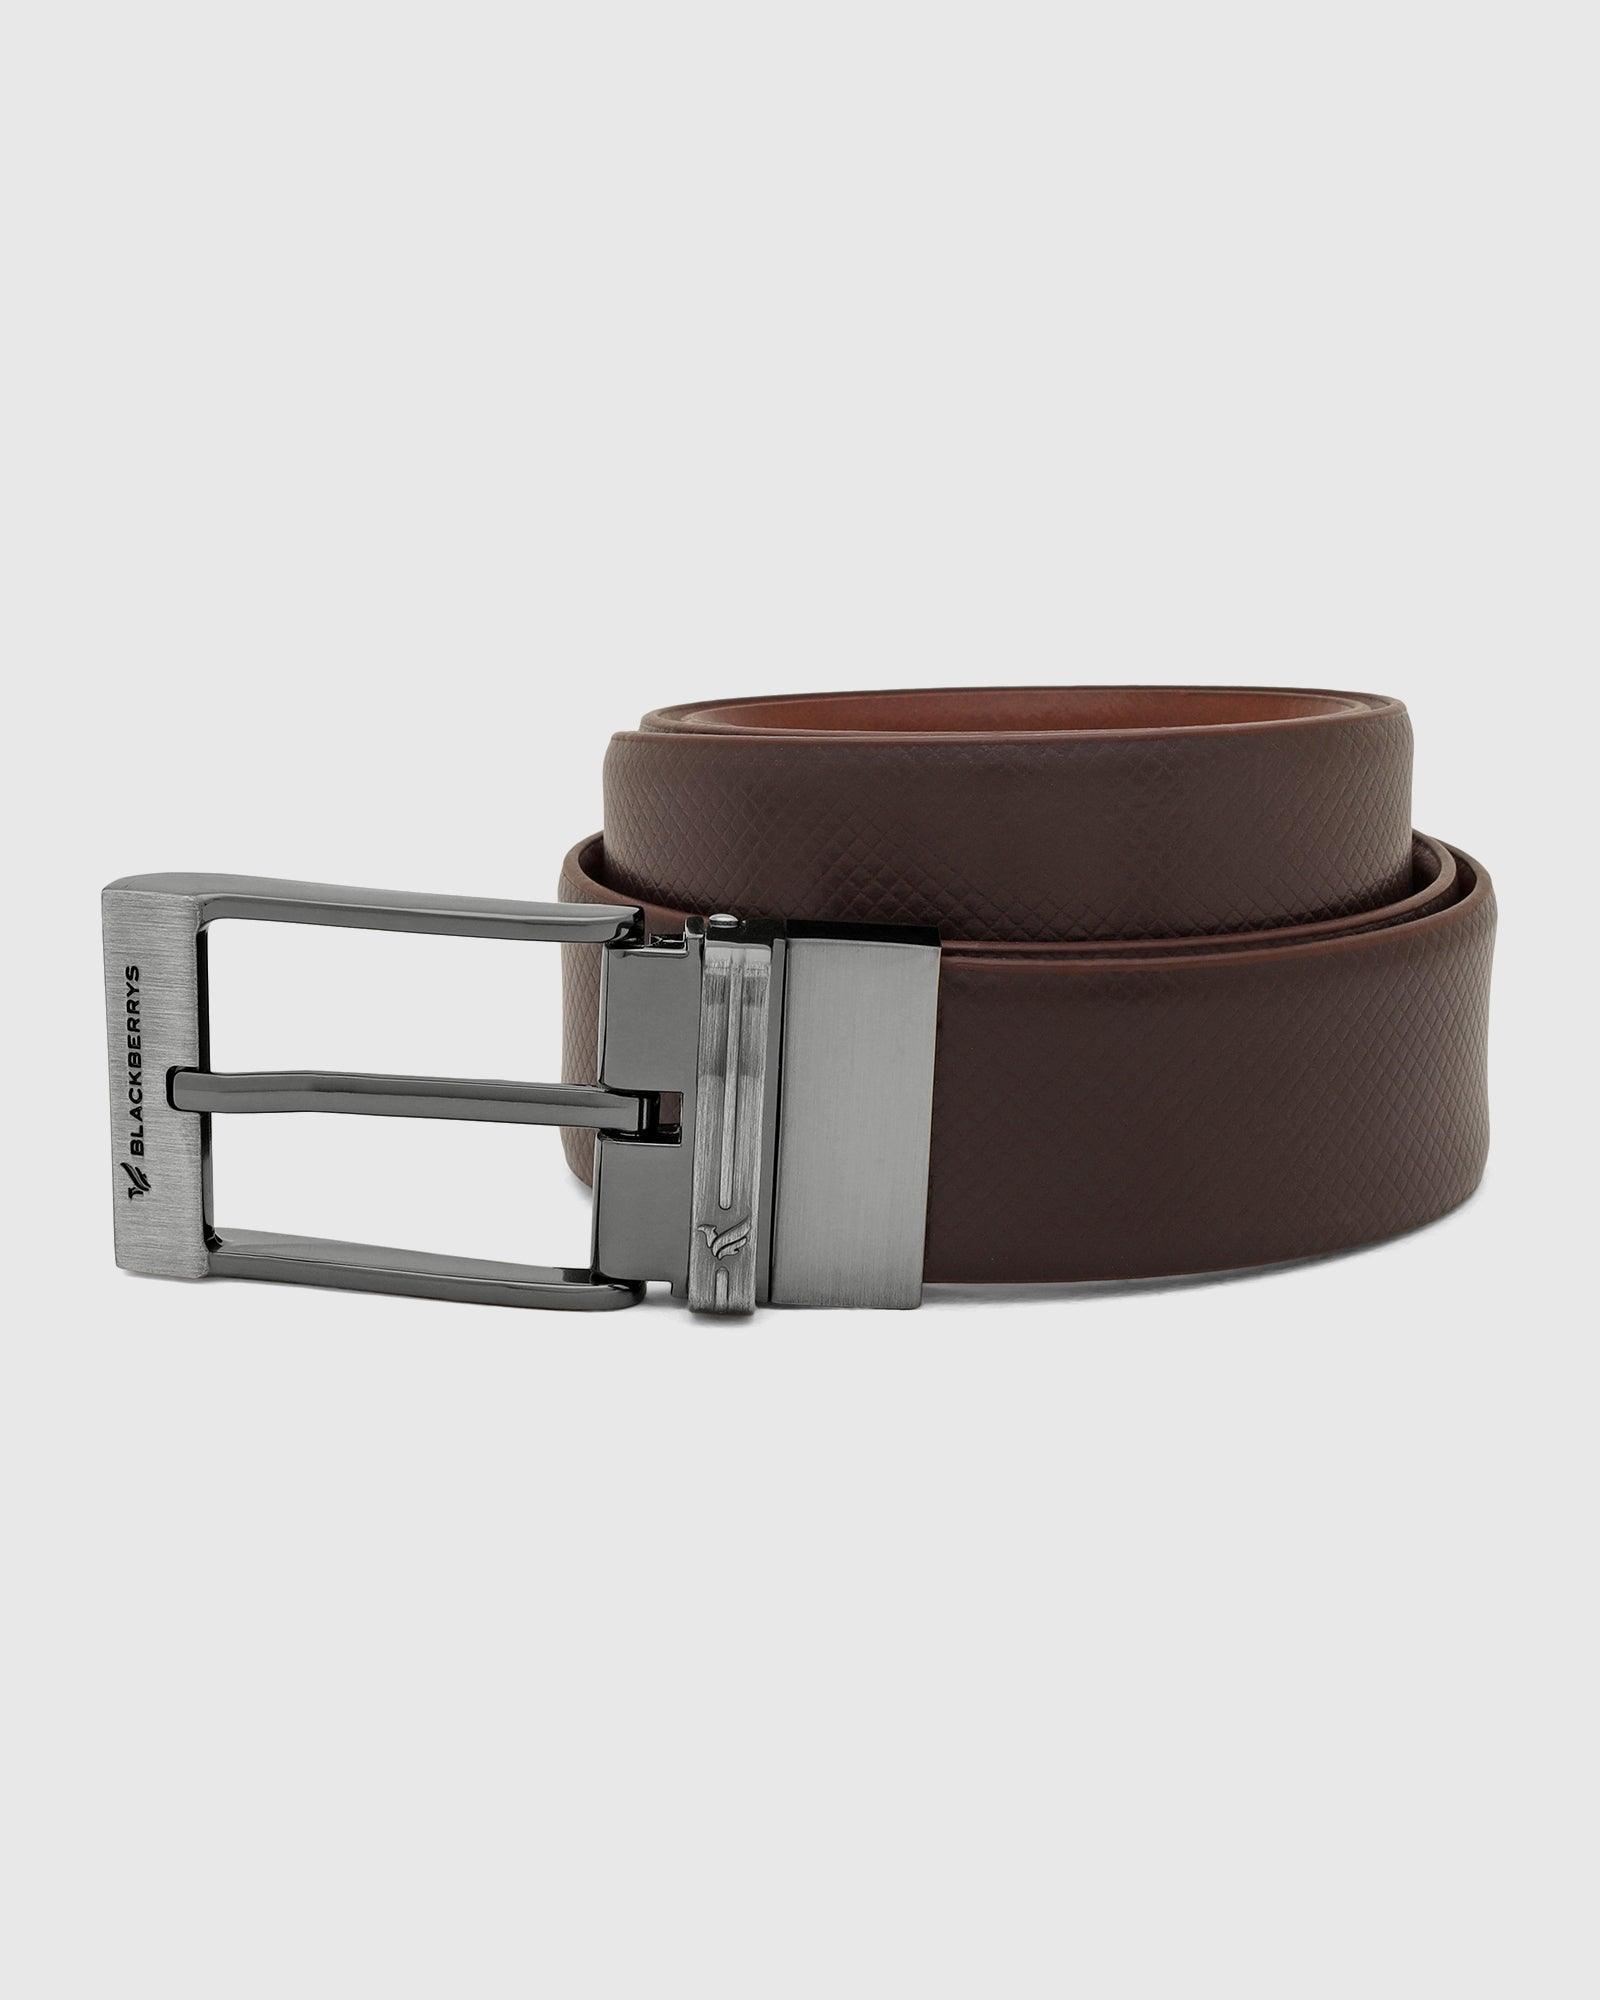 leather reversible brown tan textured belt - new pavel